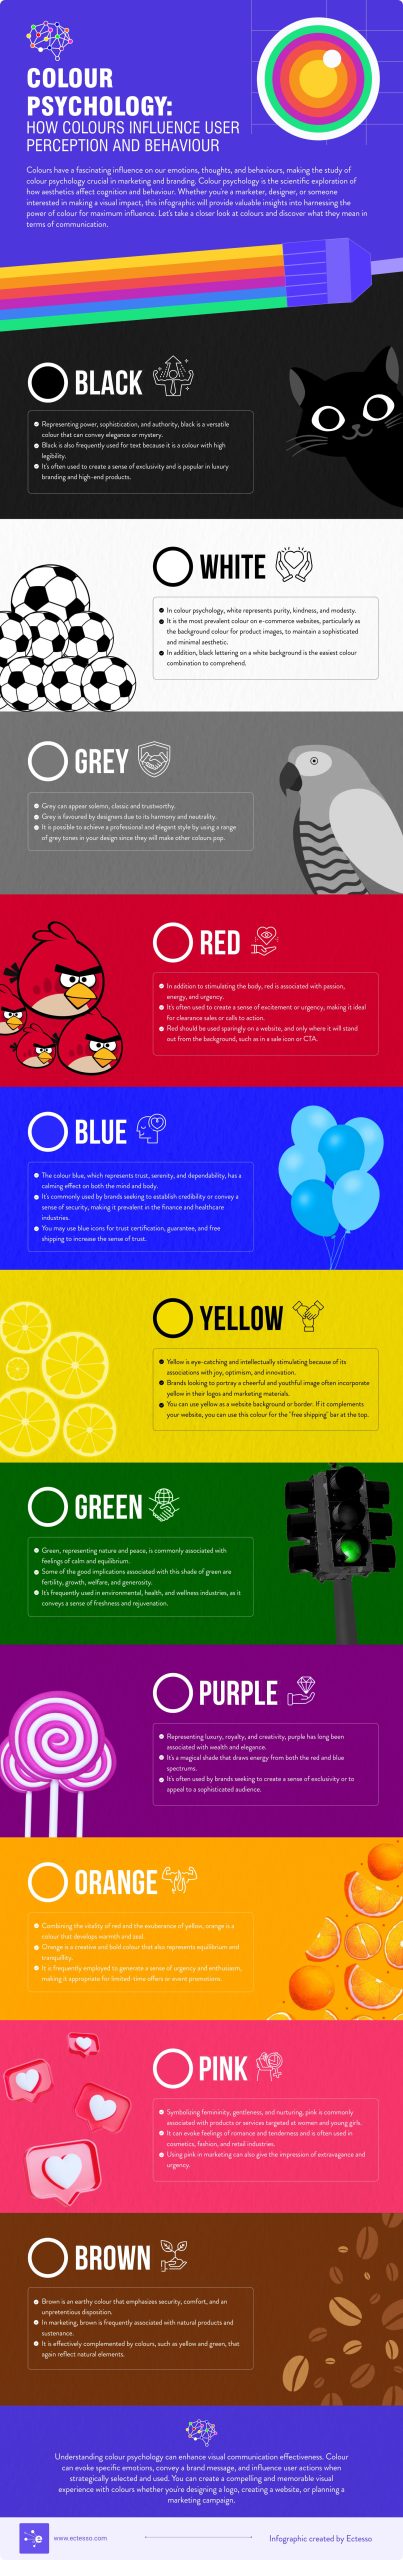 How Colours Influence Users - Ectesso